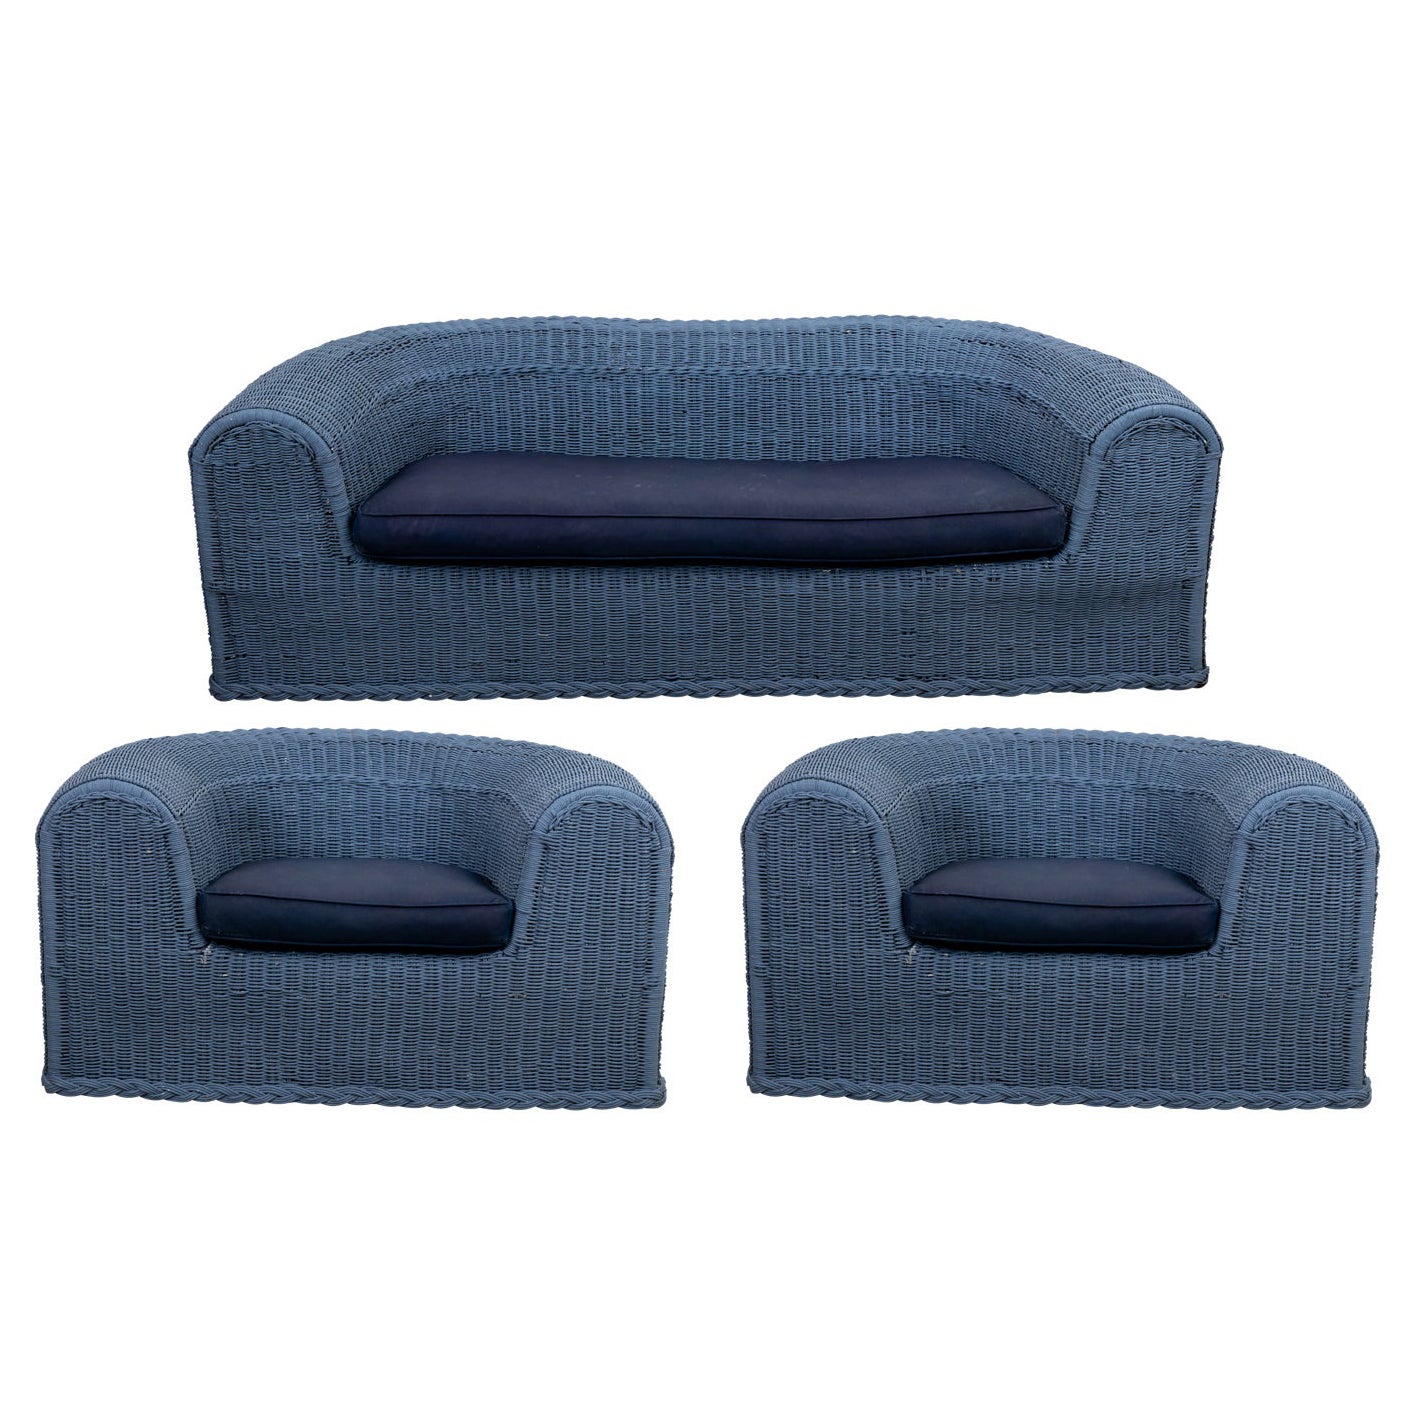 Three Piece Blue Painted Wicker Settee with Two Chairs For Sale